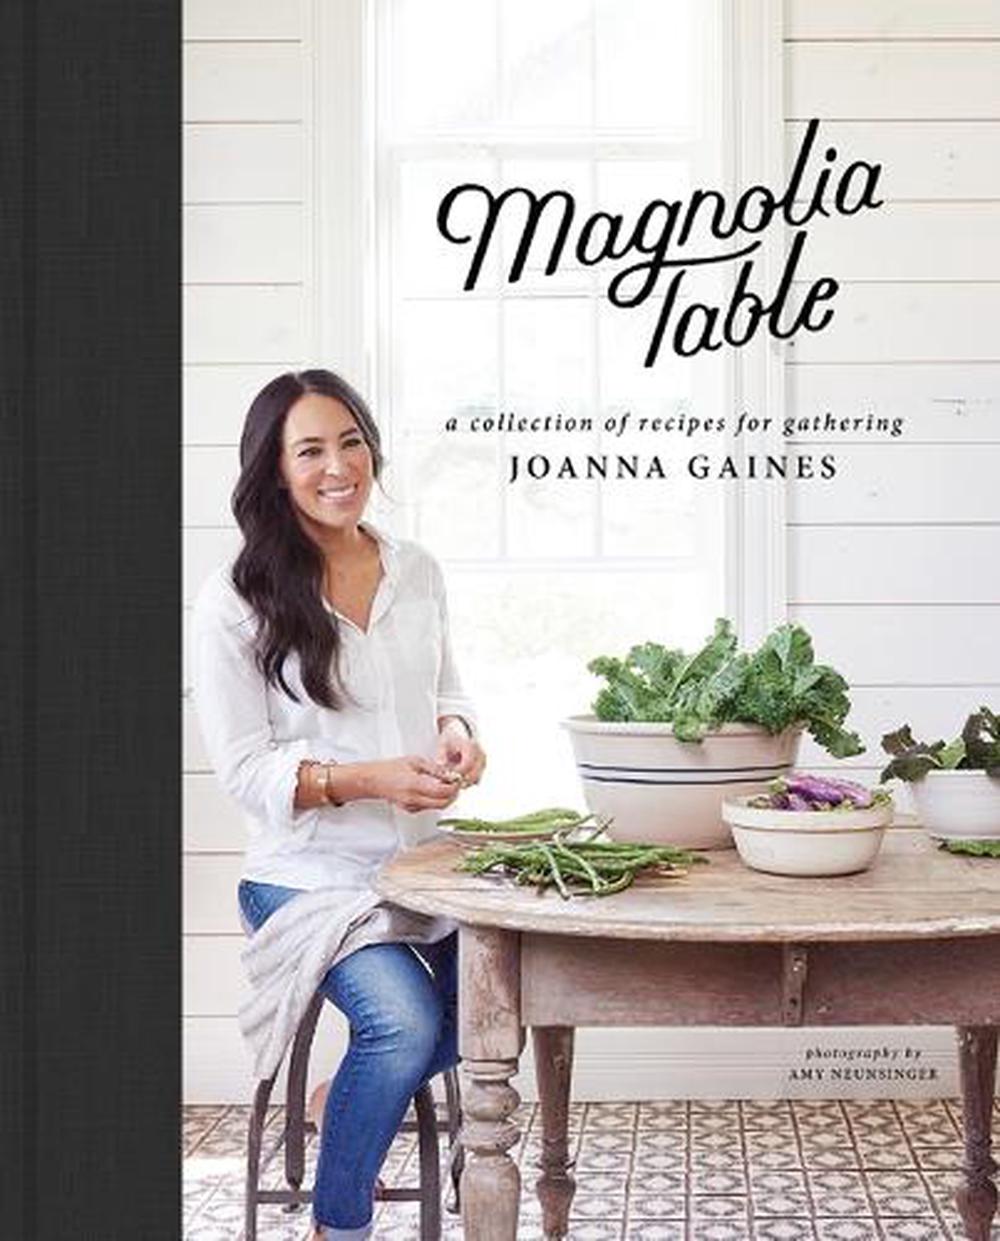 Magnolia Table by Joanna Gaines, Hardcover, 9780062820150 | Buy online ...